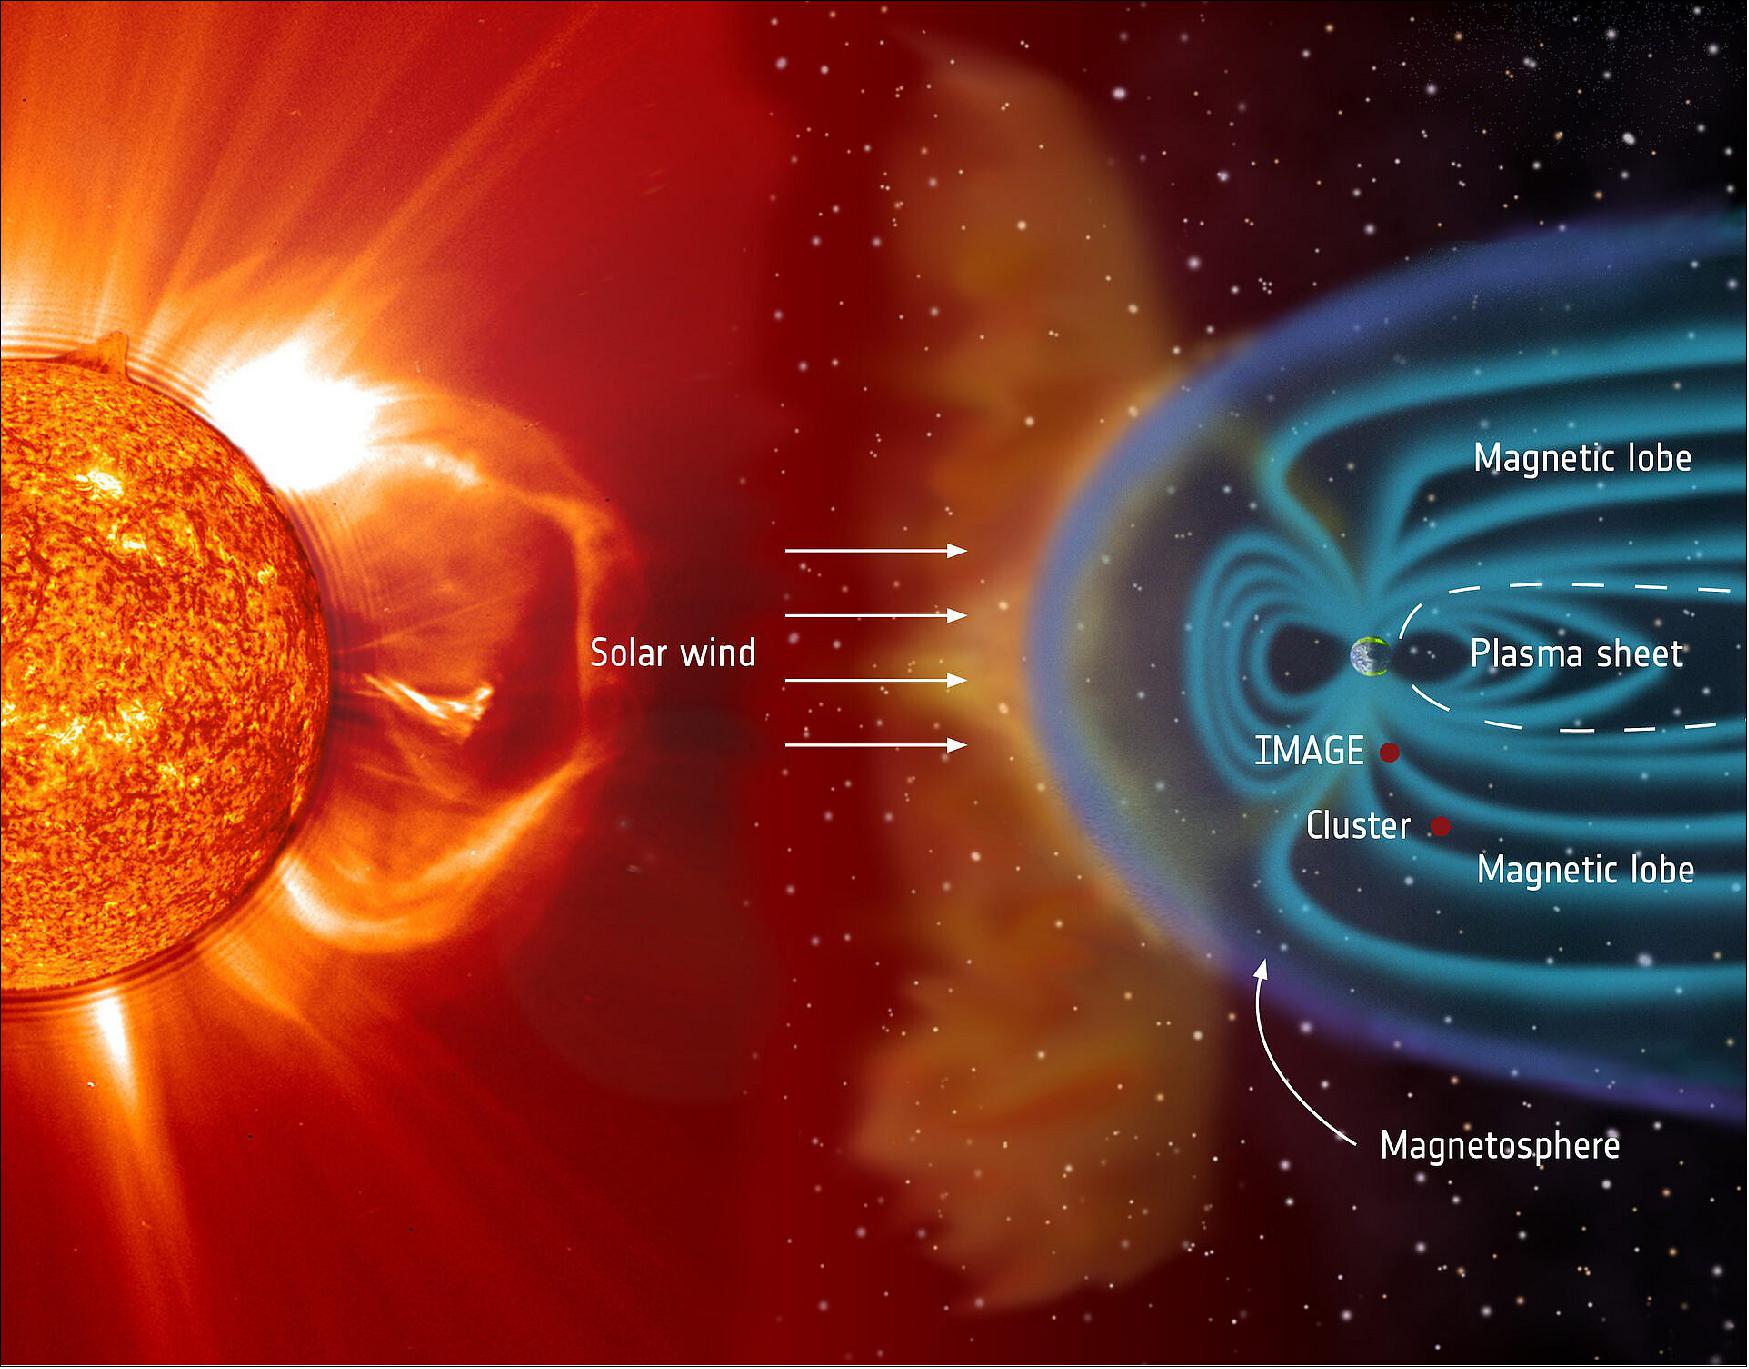 Figure 13: Cluster and Image during aurora observation. The night side of the terrestrial magnetosphere forms a structured magnetotail, consisting of a plasma sheet at low latitudes that is sandwiched between two regions called the magnetotail lobes. The lobes consist of the regions in which Earth's magnetic field lines are directly connected to the magnetic field carried by the solar wind. Different plasma populations are observed in these regions – plasma in the lobes is very cool, whereas the plasma sheet is more energetic. - The diagram labels by two red dots the location of an ESA Cluster satellite and NASA's Image satellite on 15 September 2005, when particular conditions of the magnetic field configuration gave rise to a phenomenon known as 'theta aurora' (image credit: ESA/NASA/SOHO/LASCO/EIT)